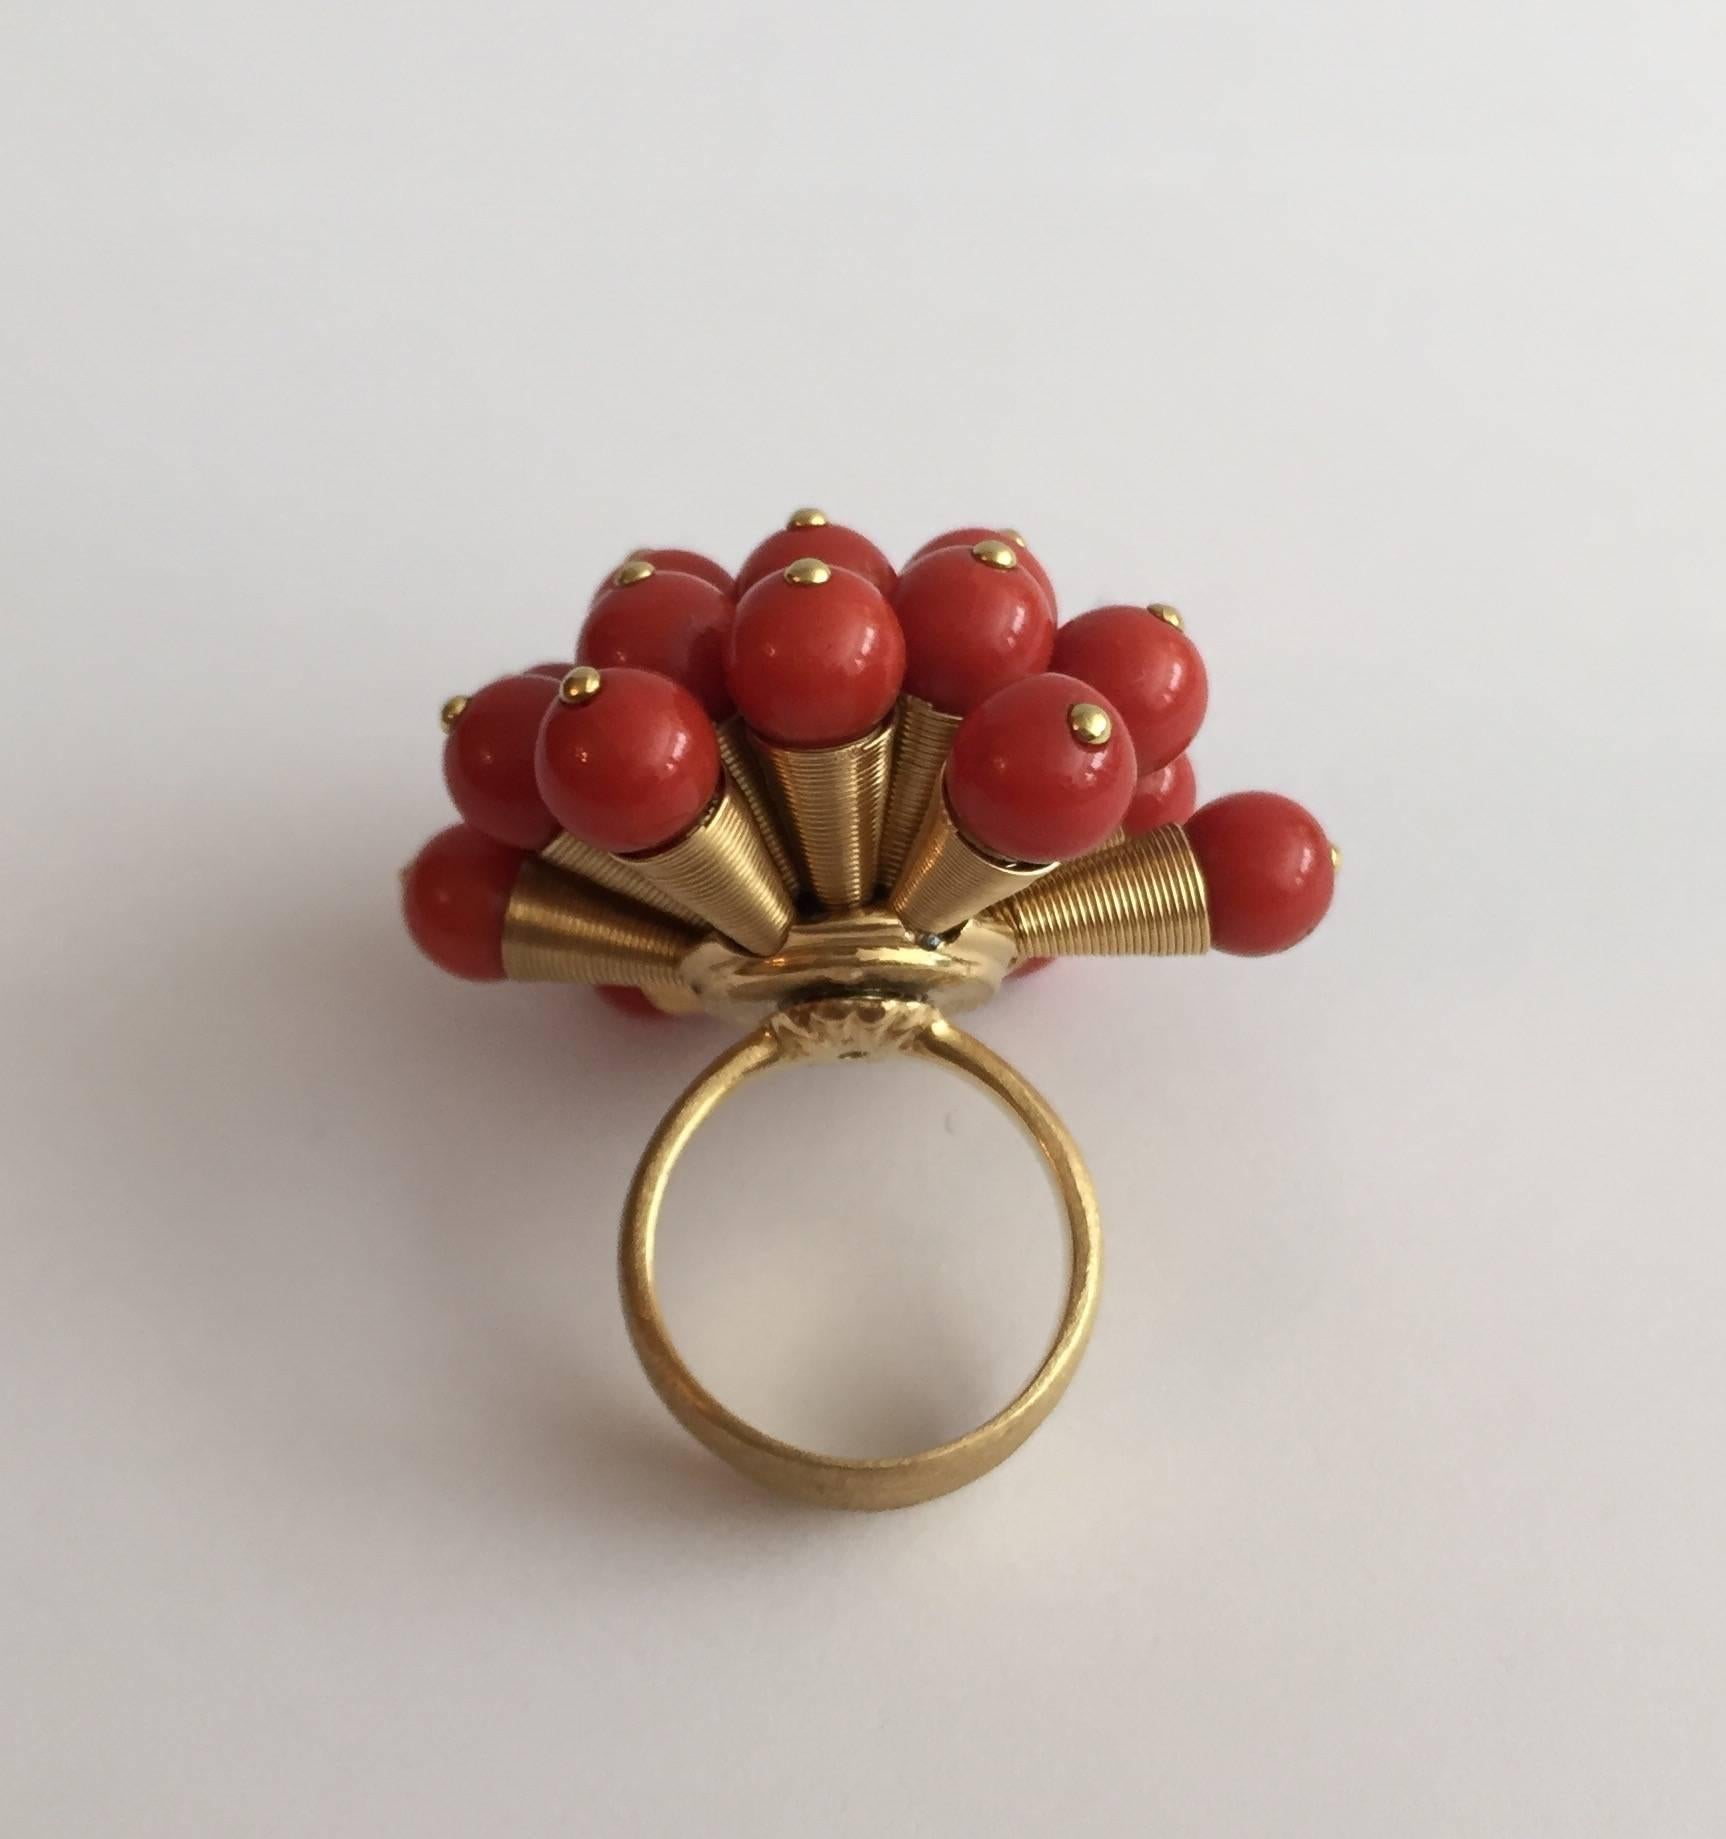 Lorredo Italian Coral and 18kt  Bubble Ring swirls with beautiful movement, Coral beads on individual spring loaded gold pegs. Size 6, sizable